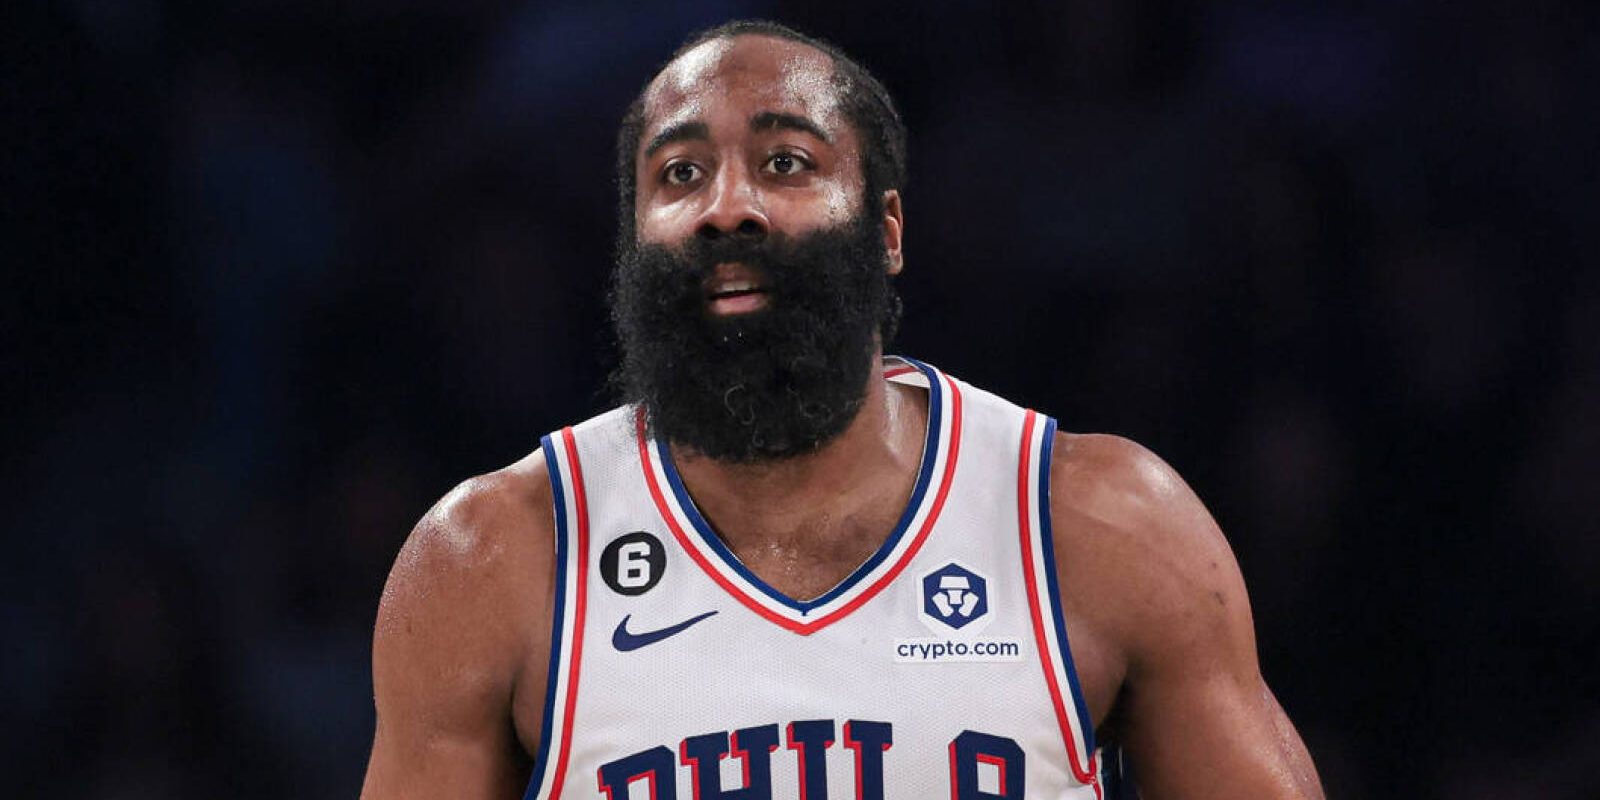 Apr 22, 2023; Brooklyn, New York, USA; Philadelphia 76ers guard James Harden (1) dribbles up court against the Brooklyn Nets during the second quarter of game four of the 2023 NBA playoffs at Barclays Center. Mandatory Credit: Vincent Carchietta-USA TODAY Sports